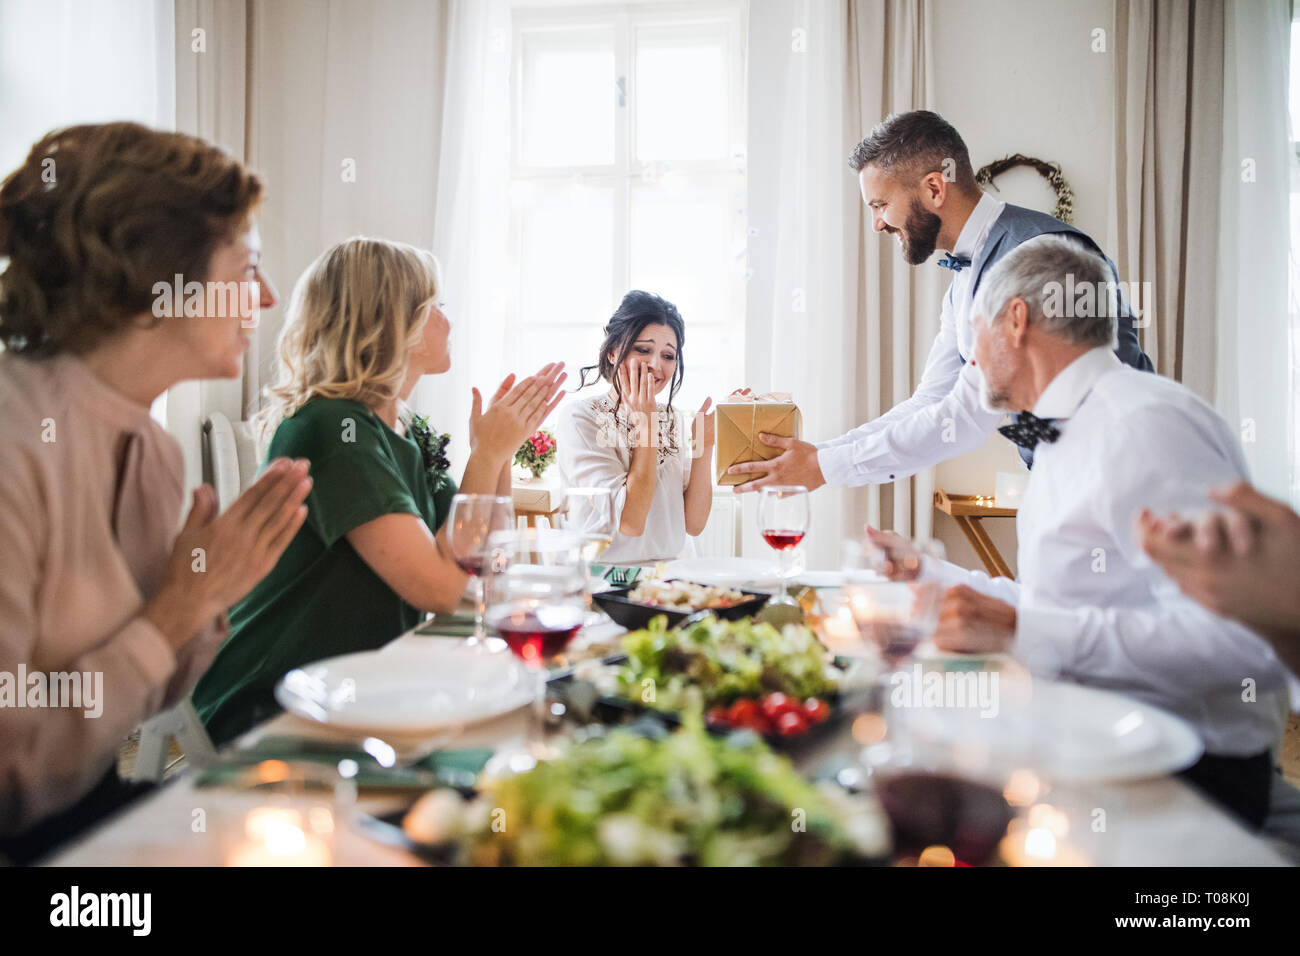 A man giving gift to a young surprised woman on a family birthday party. Stock Photo